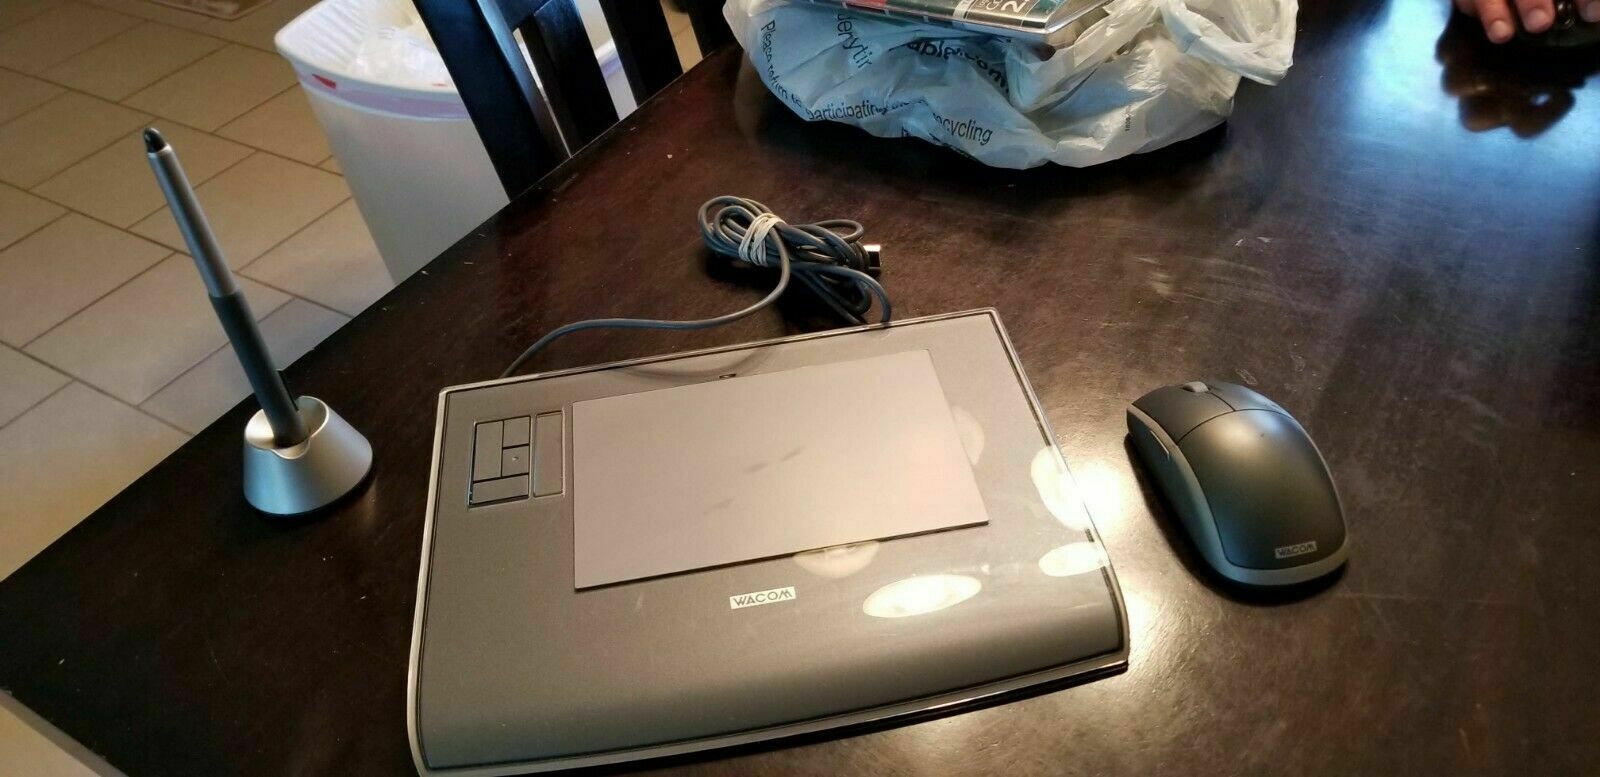 Wacom Intuos 3 PTZ-431W Drawing Graphics Gray Tablet Art Electronic Stylus +More